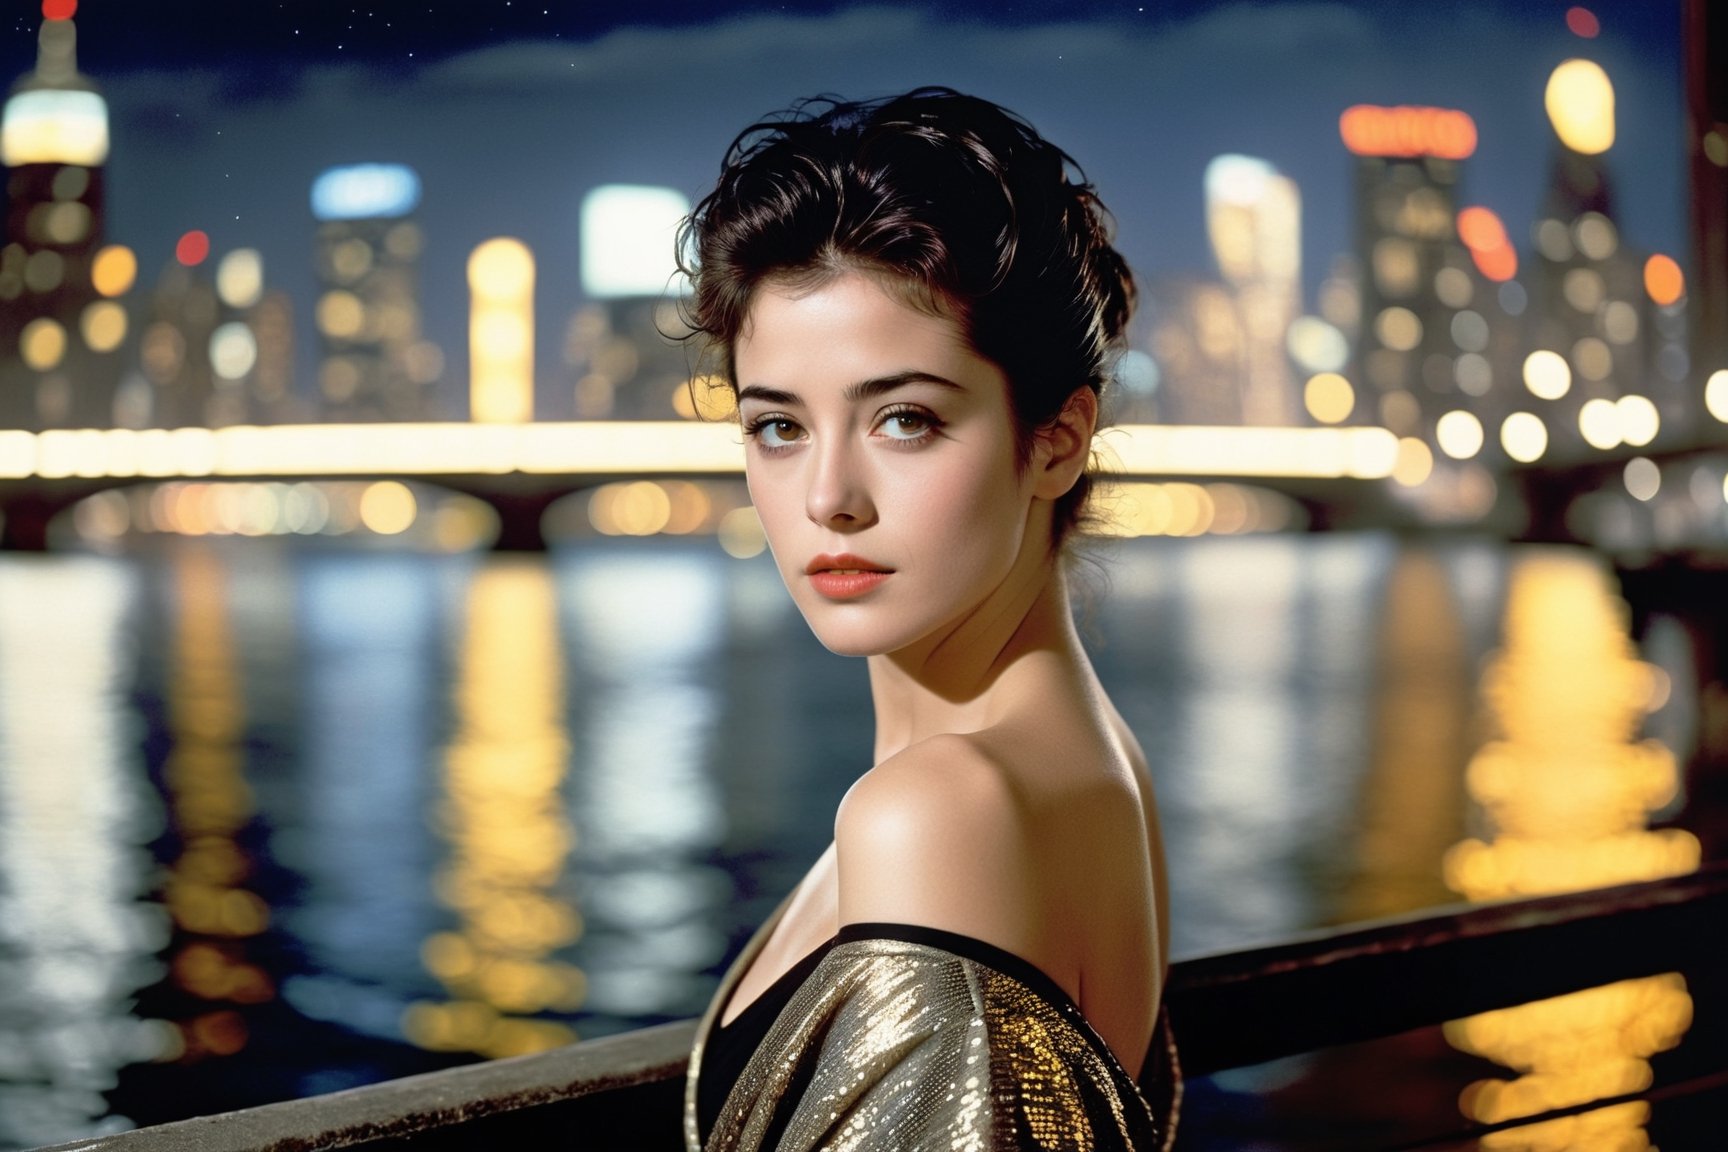 Here's a prompt for generating an image:

A 20-year-old girl \(Sean Young\)stands solo on a bridge at night, her gaze directed straight into the camera lens. Inspired by Sean Young's iconic pose in Blade Runner. Her facial features are hyper-realistically rendered, showcasing perfect skin tone and clear definition. The model body is toned and athletic, with a striking female form. Against the blurred backdrop of a beautiful River, the cityscape twinkles with lights, tower silhouettes, and bustling activity.

The composition is masterfully crafted to follow the rule of thirds (1.3), placing the subject off-center for a visually appealing shot. The studio lighting creates a dramatic chiaroscuro effect, accentuating the girl's features and adding depth to the scene.

Image specifications: 32k resolution, UHD quality, perfect focus, high contrast, HDR, hyper-detailed, intricate details, ultra-realistic, and award-winning photography. Kodachrome 800 film-inspired texture adds an extra layer of authenticity. Created by a collective of renowned artists Antonio Lopez, Diego Koi, Karol Bak, and Hayao Miyazaki.